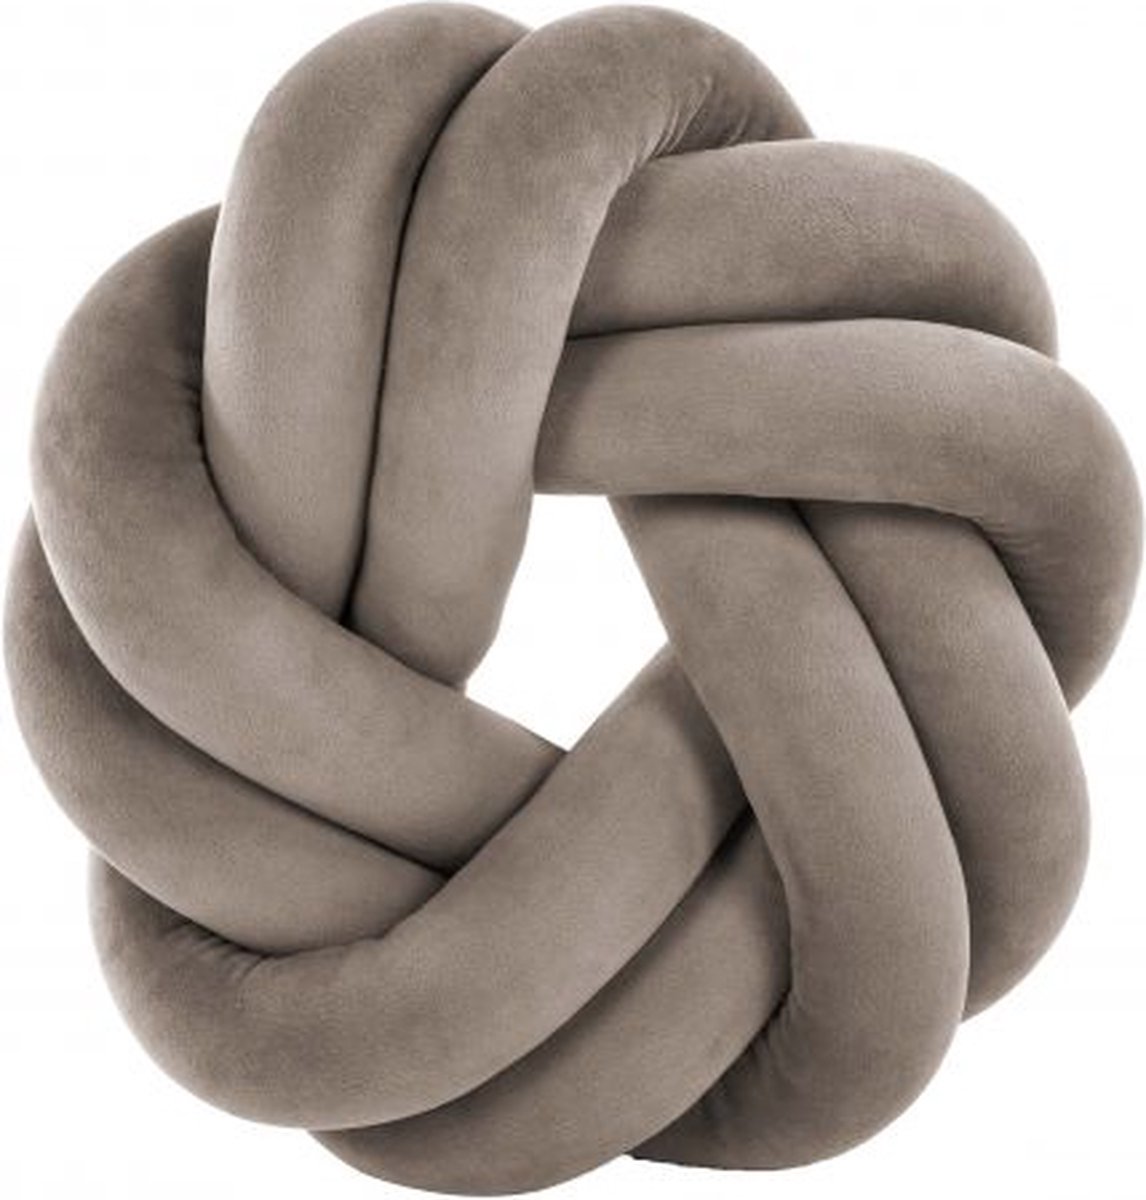 Kussen (gevuld) knot taupe 30x30x7cm